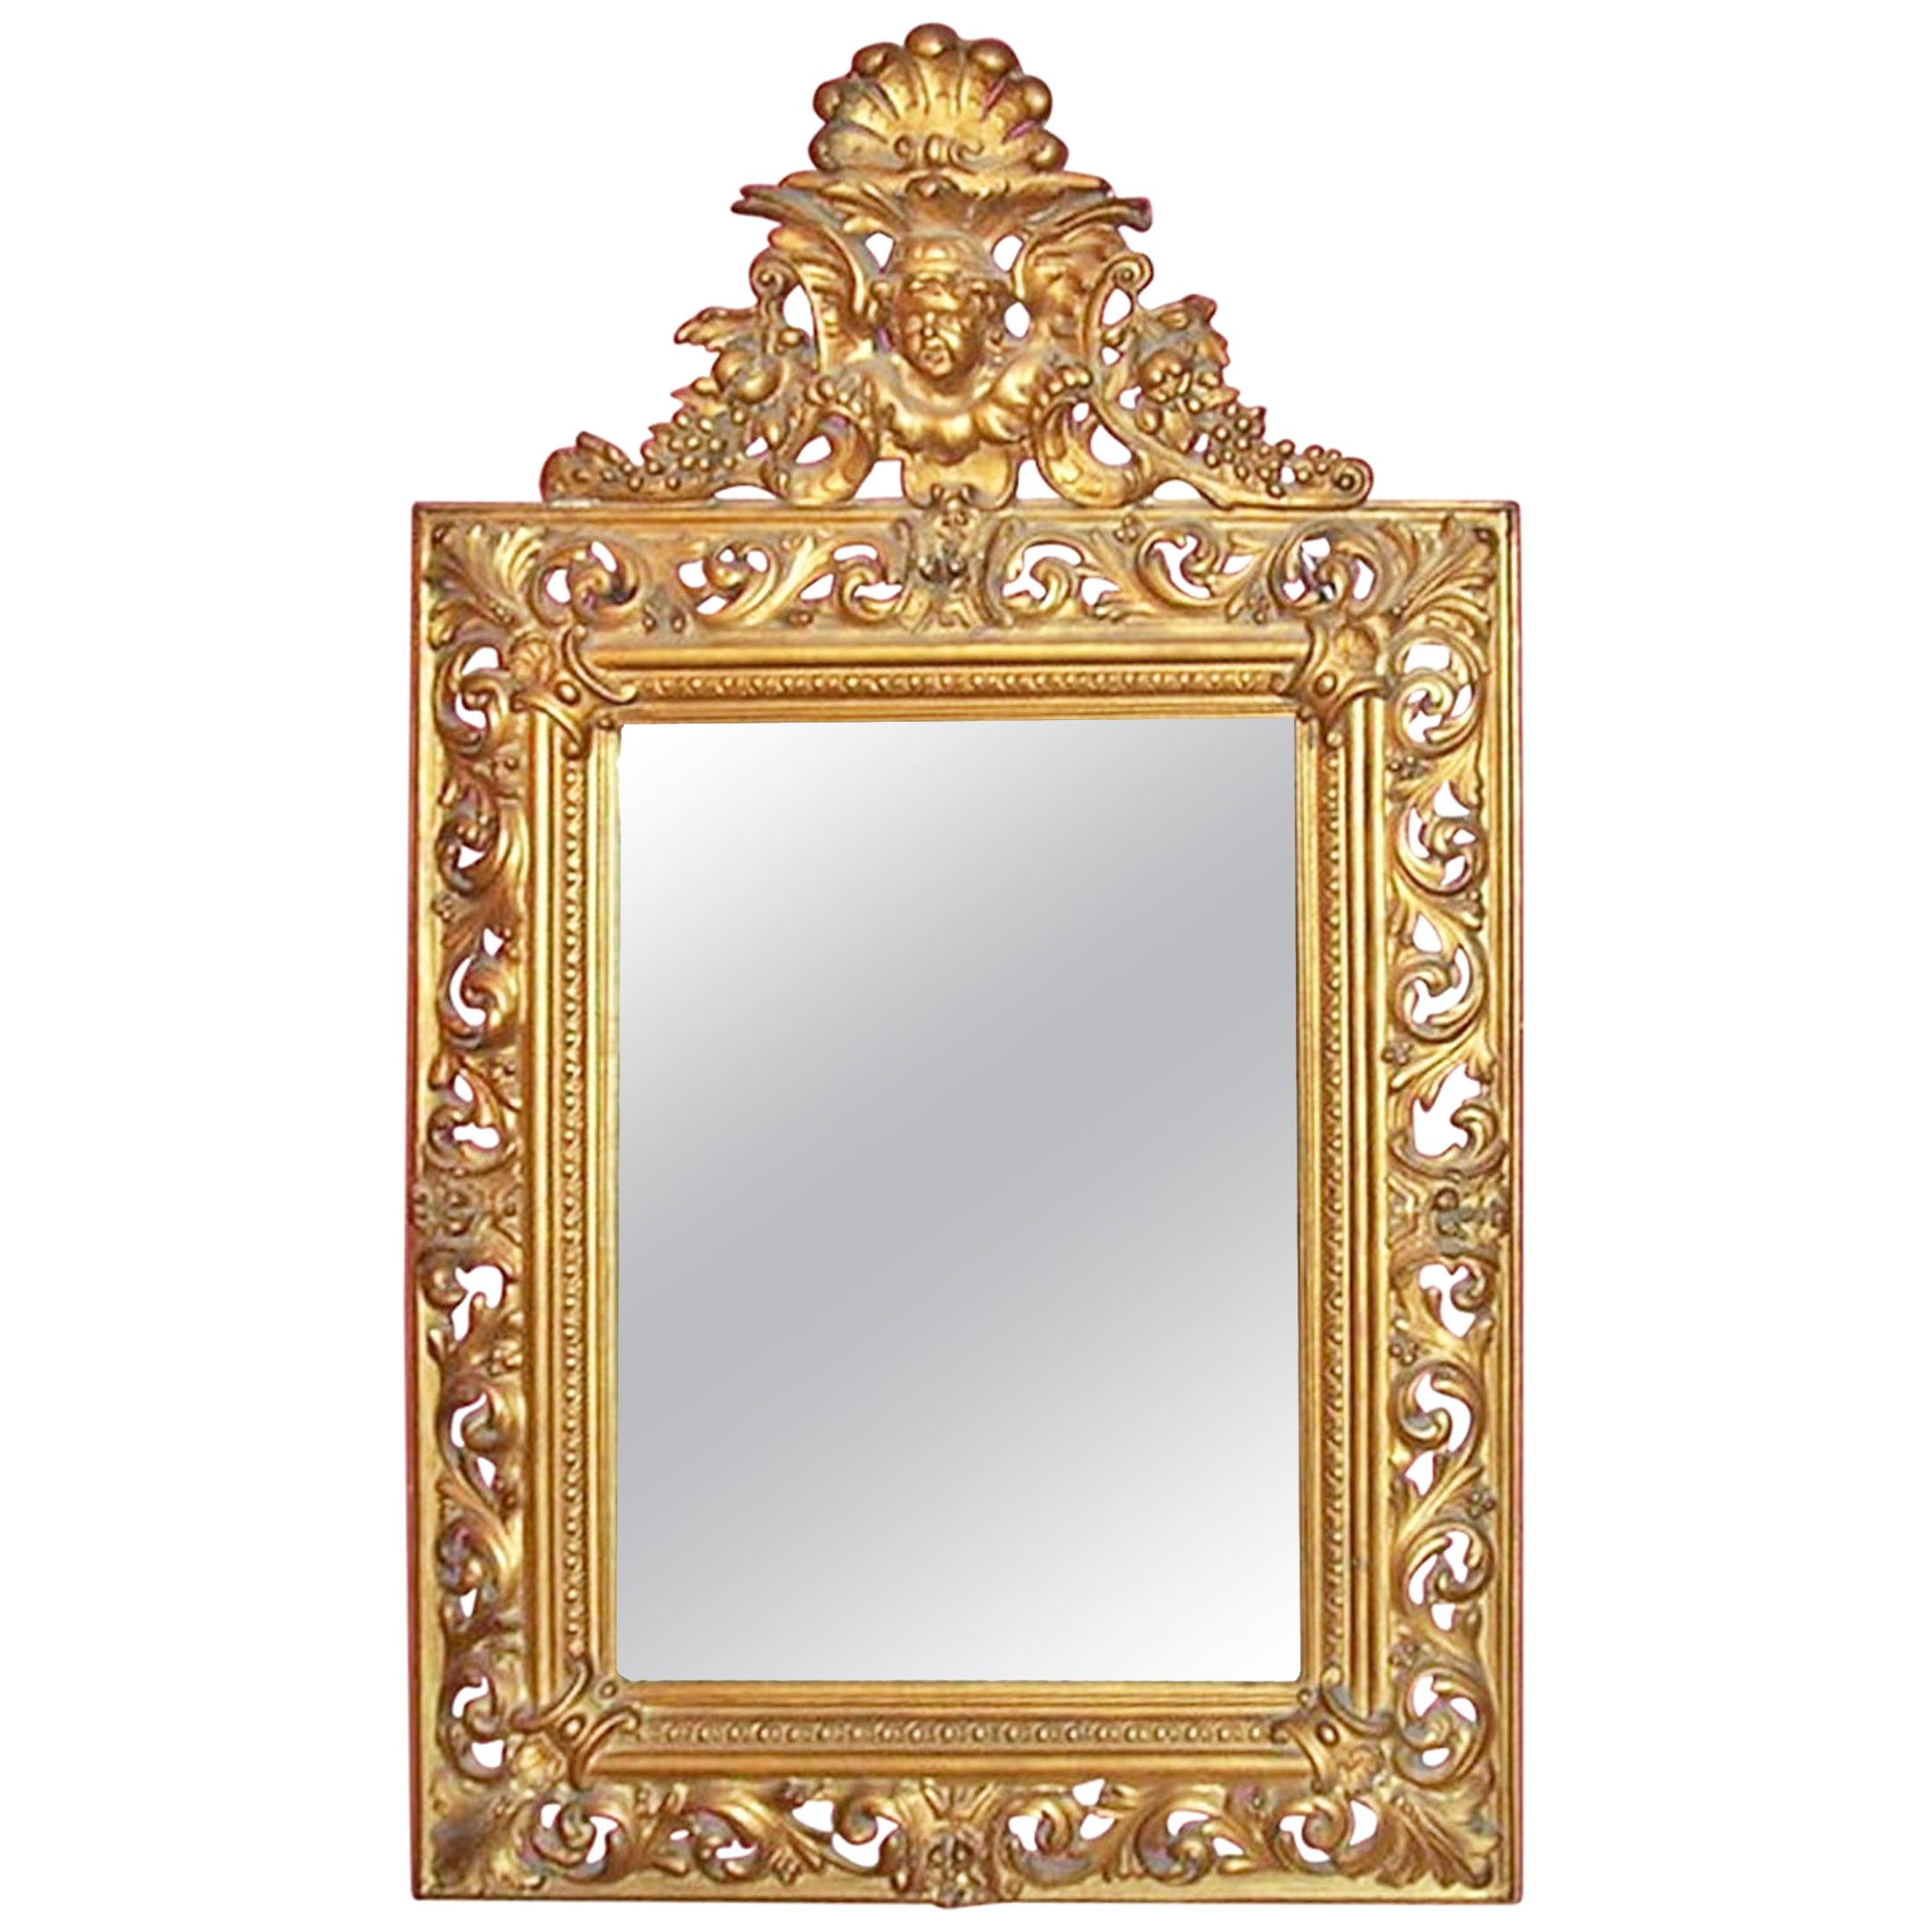 Mid-19th Century Italian Giltwood and Gesso Wall Mirror